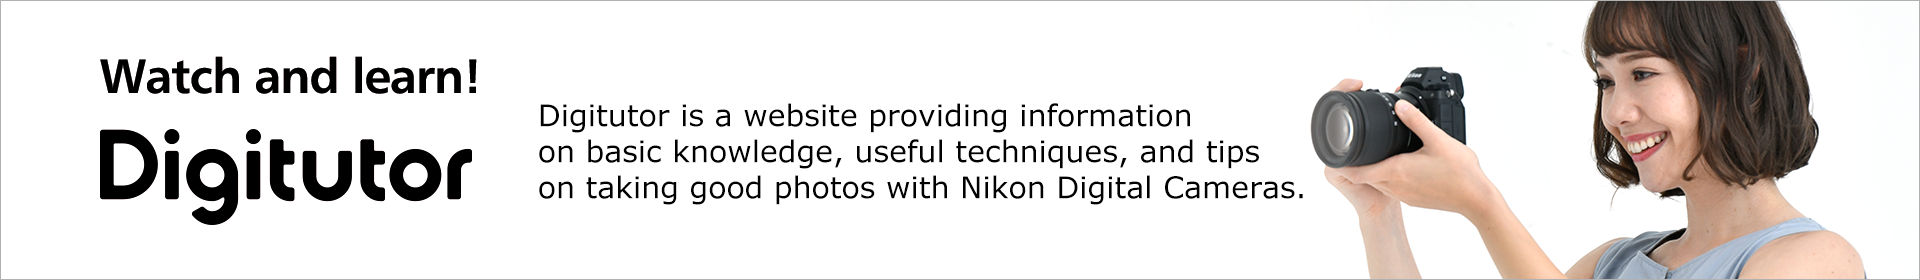 Digtutor | Digital Tutorial : Digitutor is a website providing information on basic knowledge, useful techniques, and tips on taking good photos with Nikon Digital Cameras.